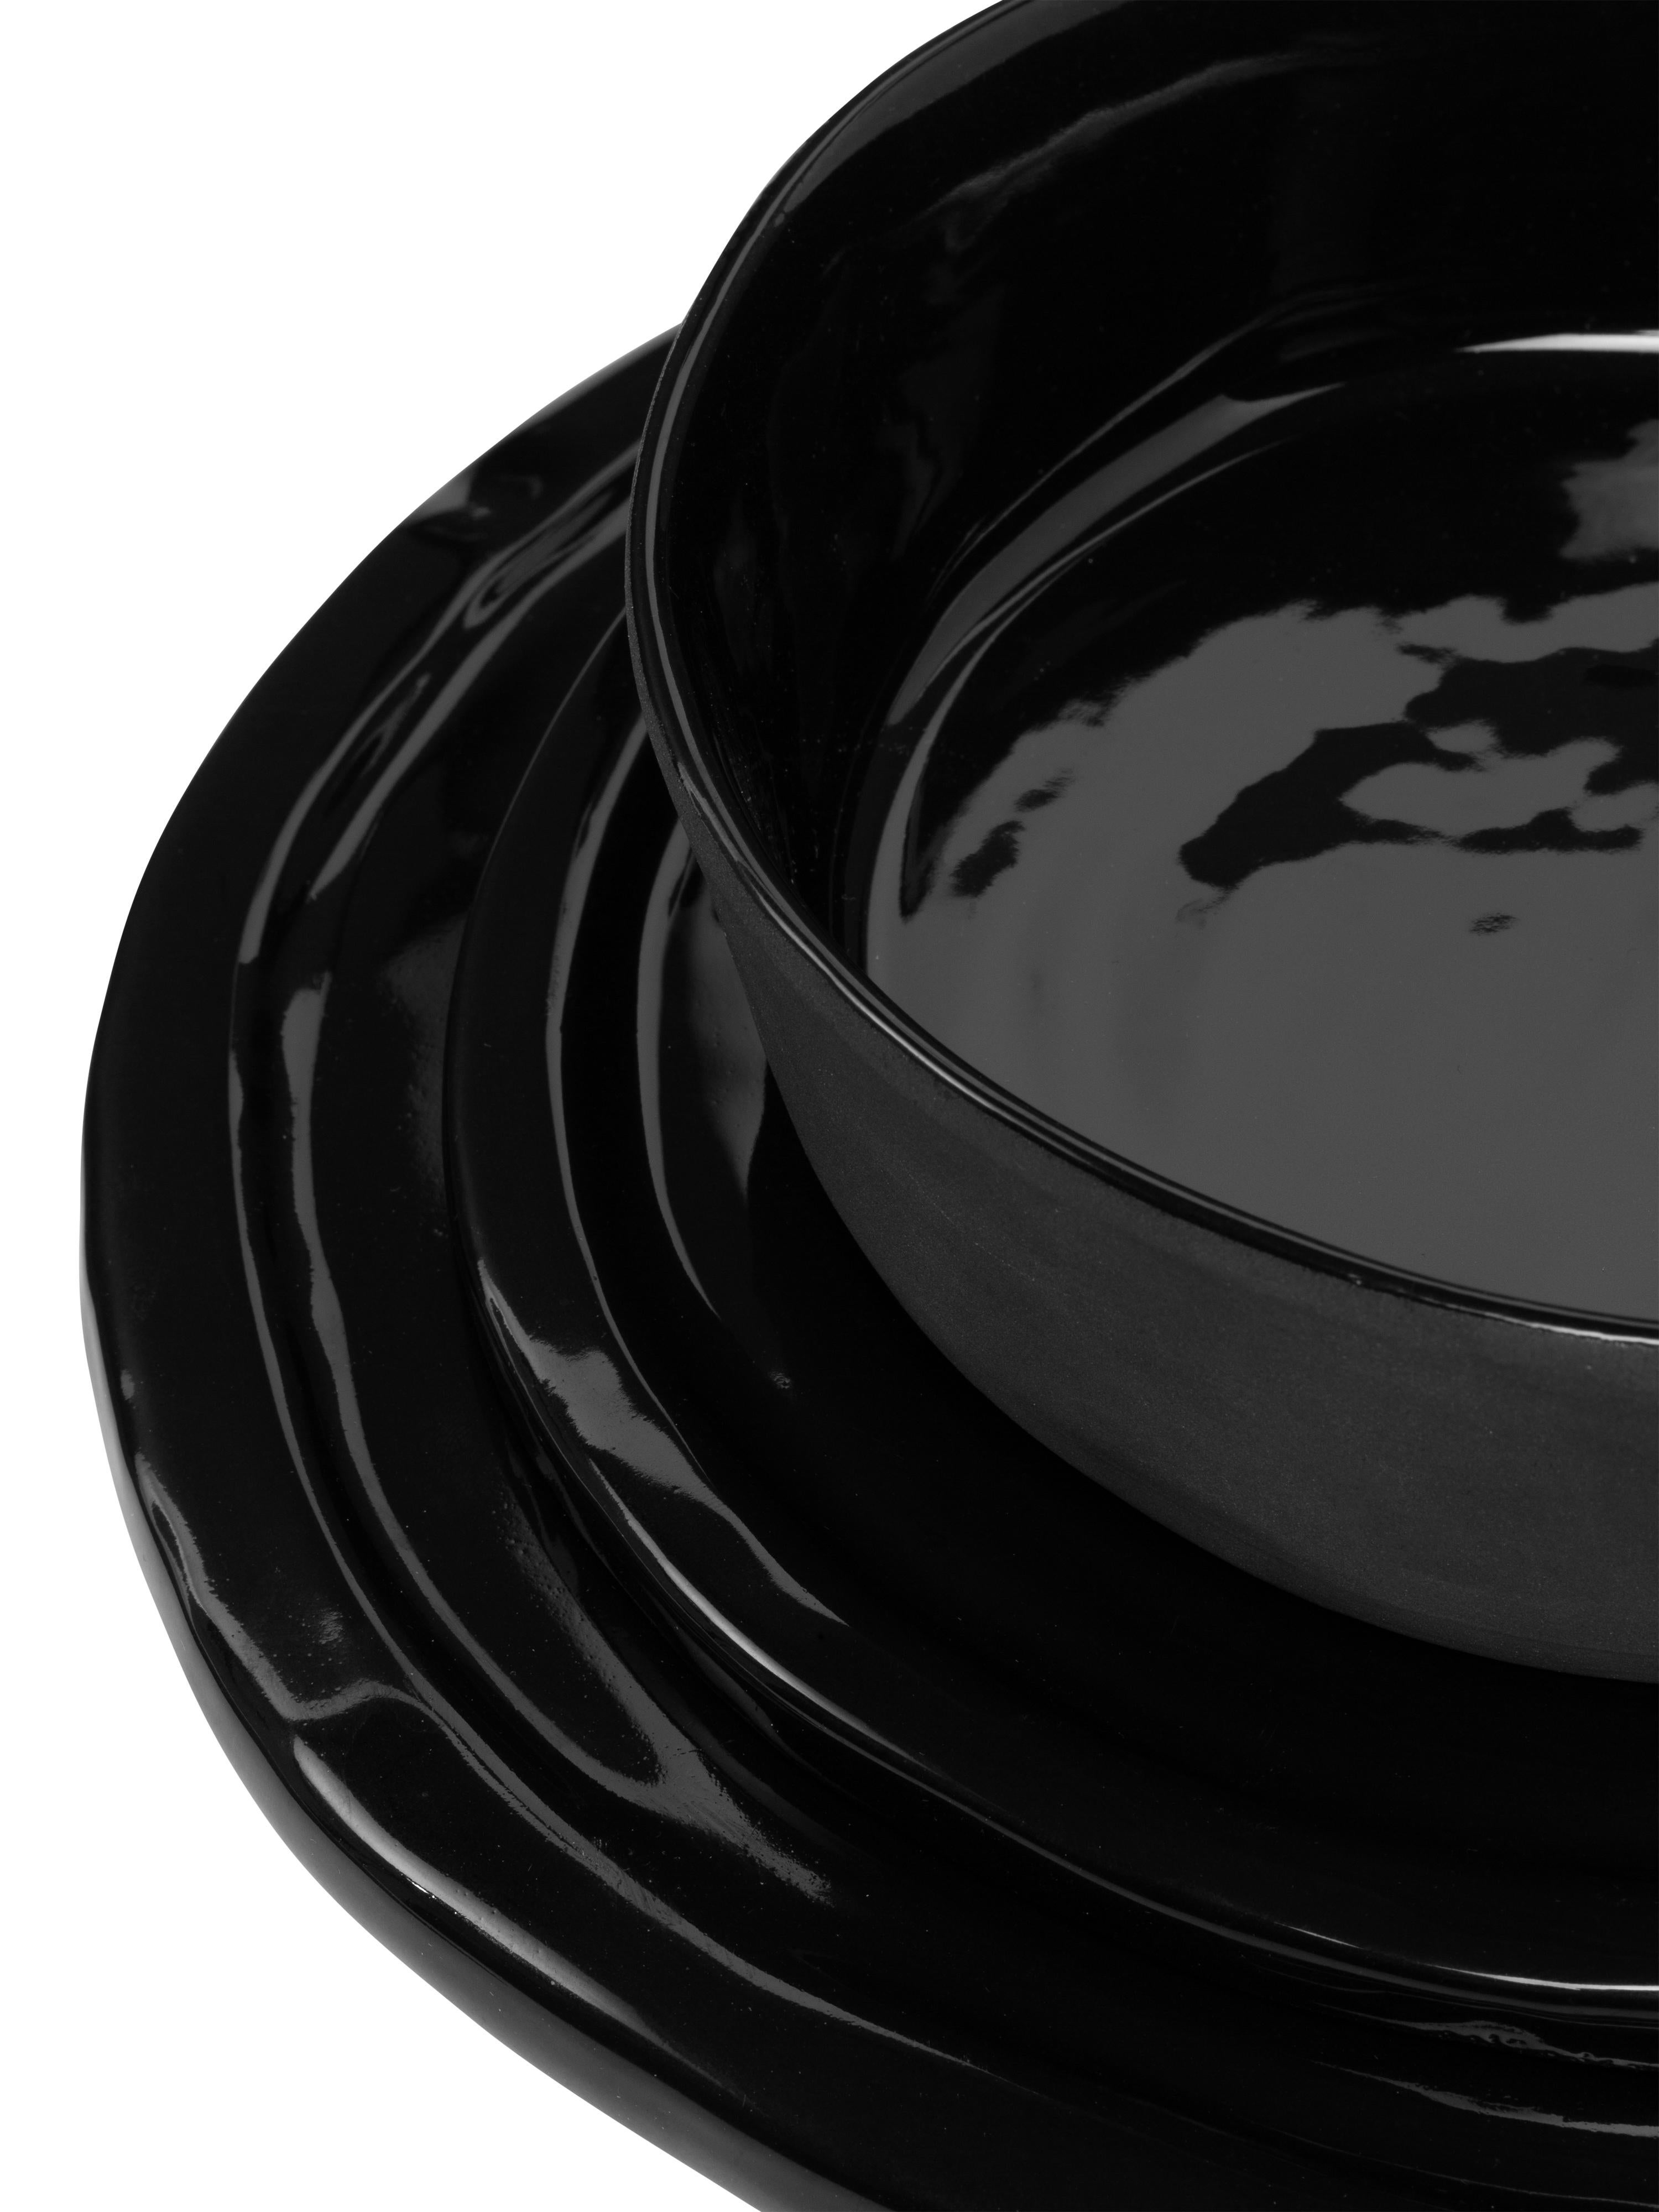 This object has been made from ceramic using an artisan method. Each piece is unique in terms of finish, colours and details. Lunch Set finish is mat black outside and Glossy Black inside. Lunch set includes two flat plates, big and medium size,